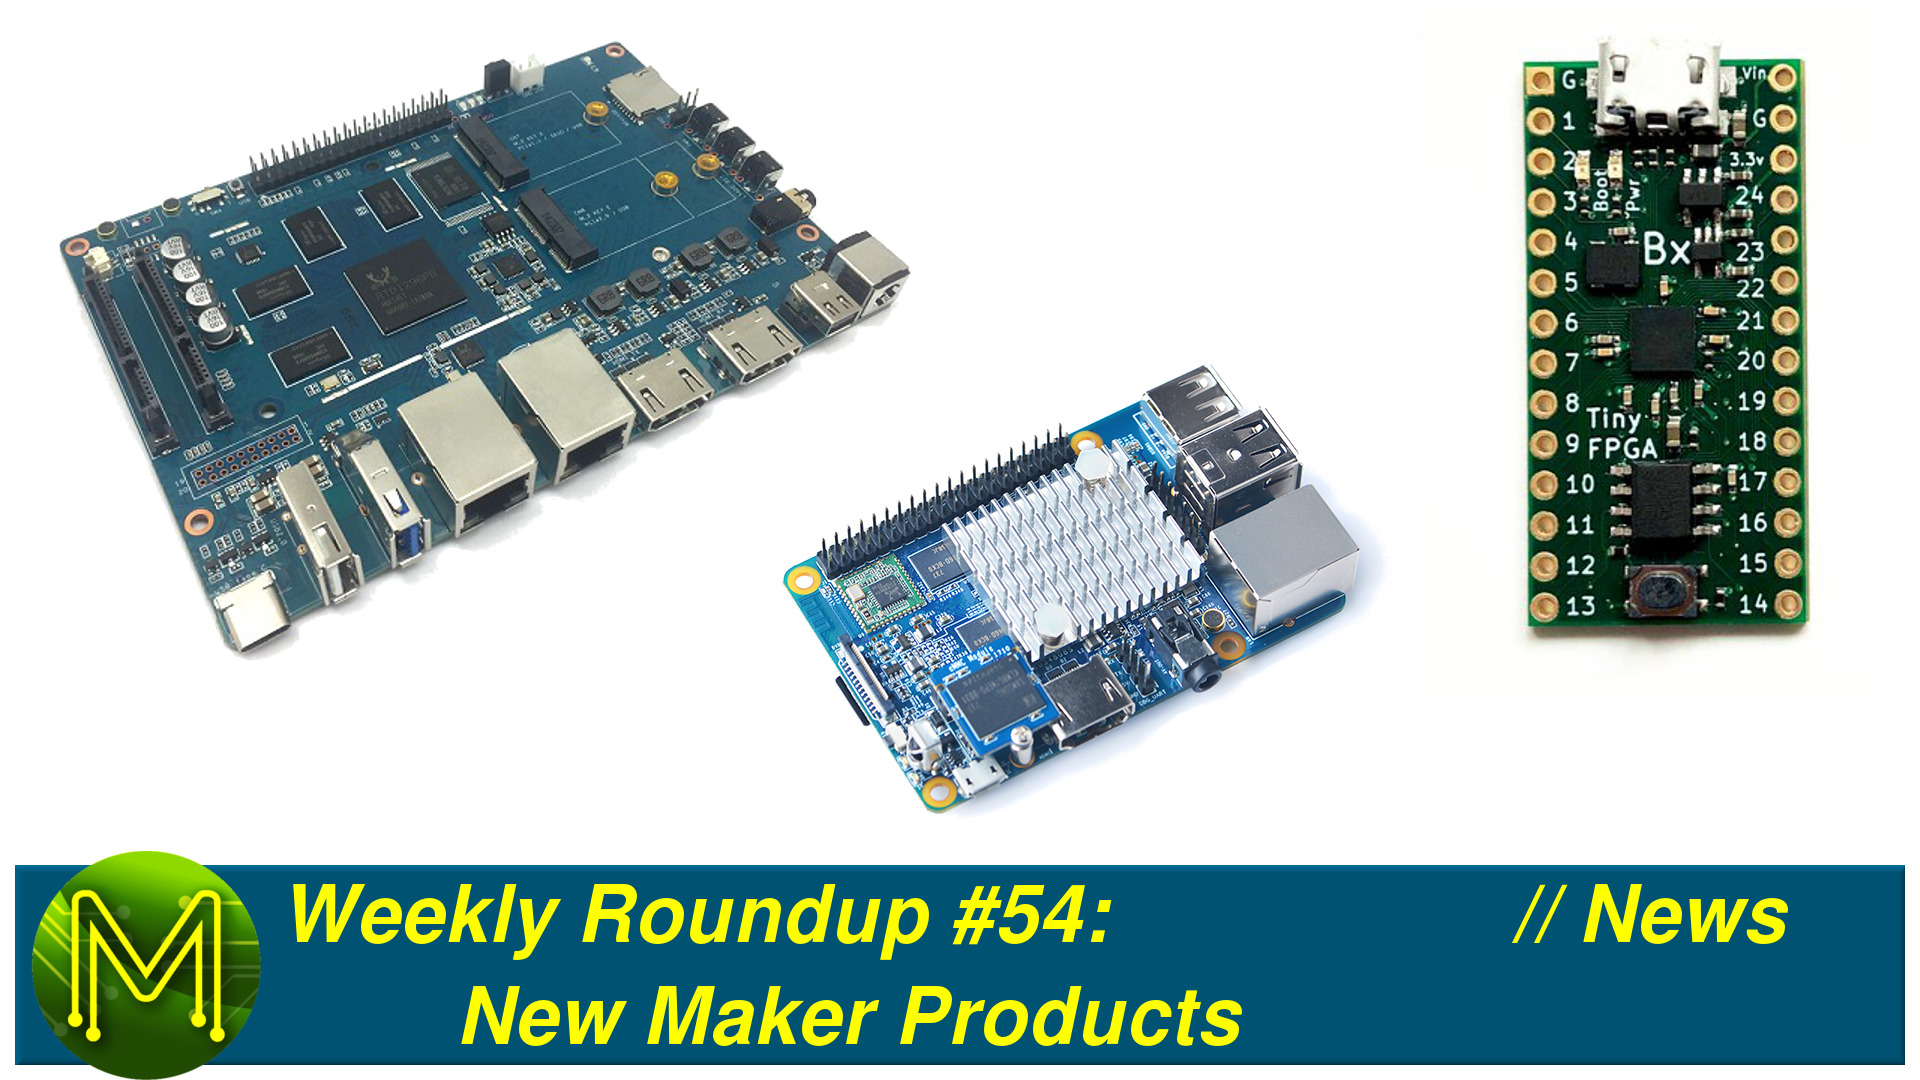 Weekly Roundup #54 – New Maker Products // News